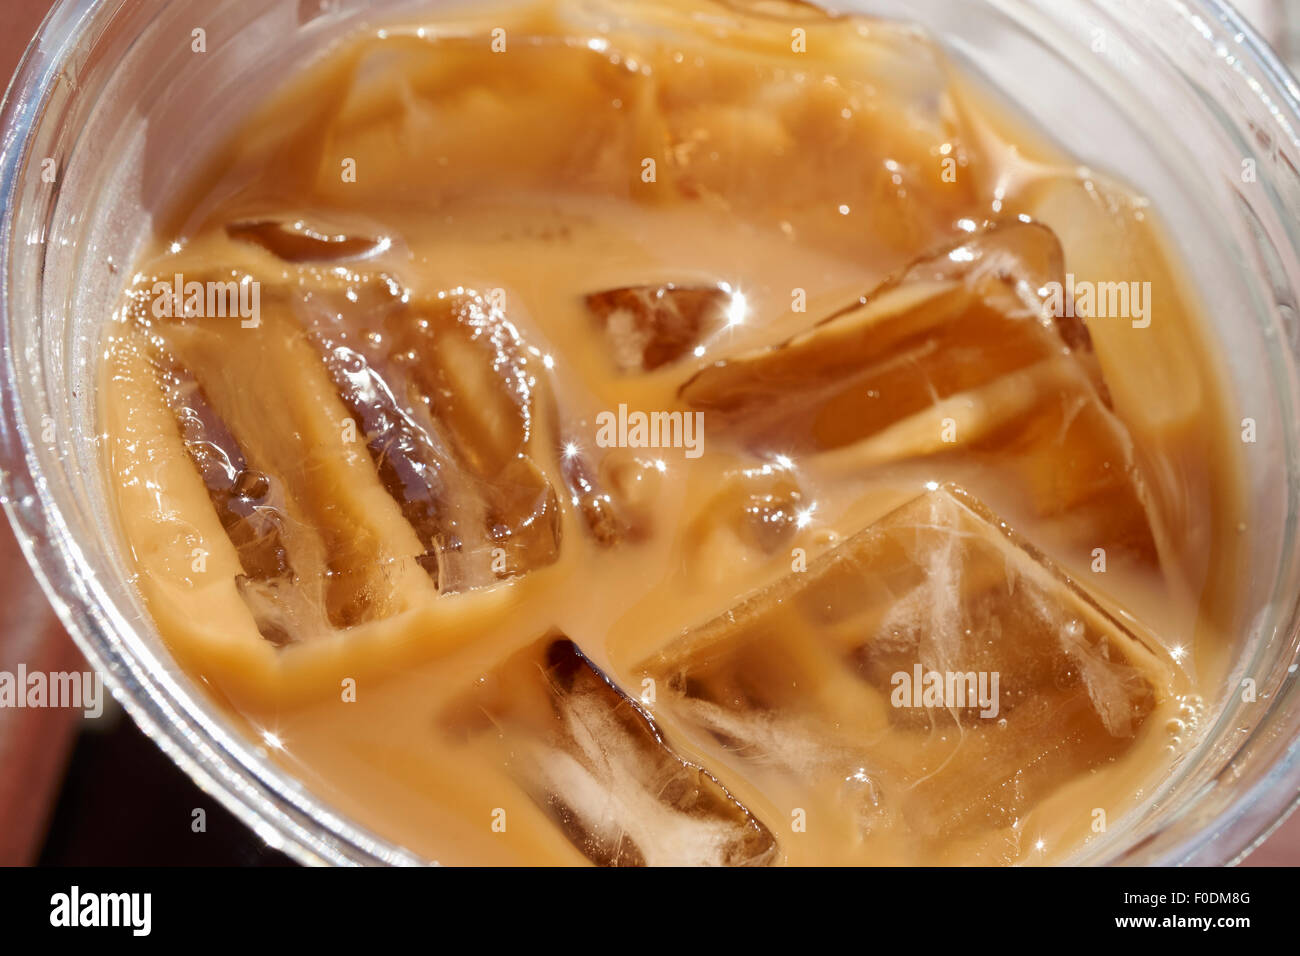 Plastic cup of iced coffee Stock Photo